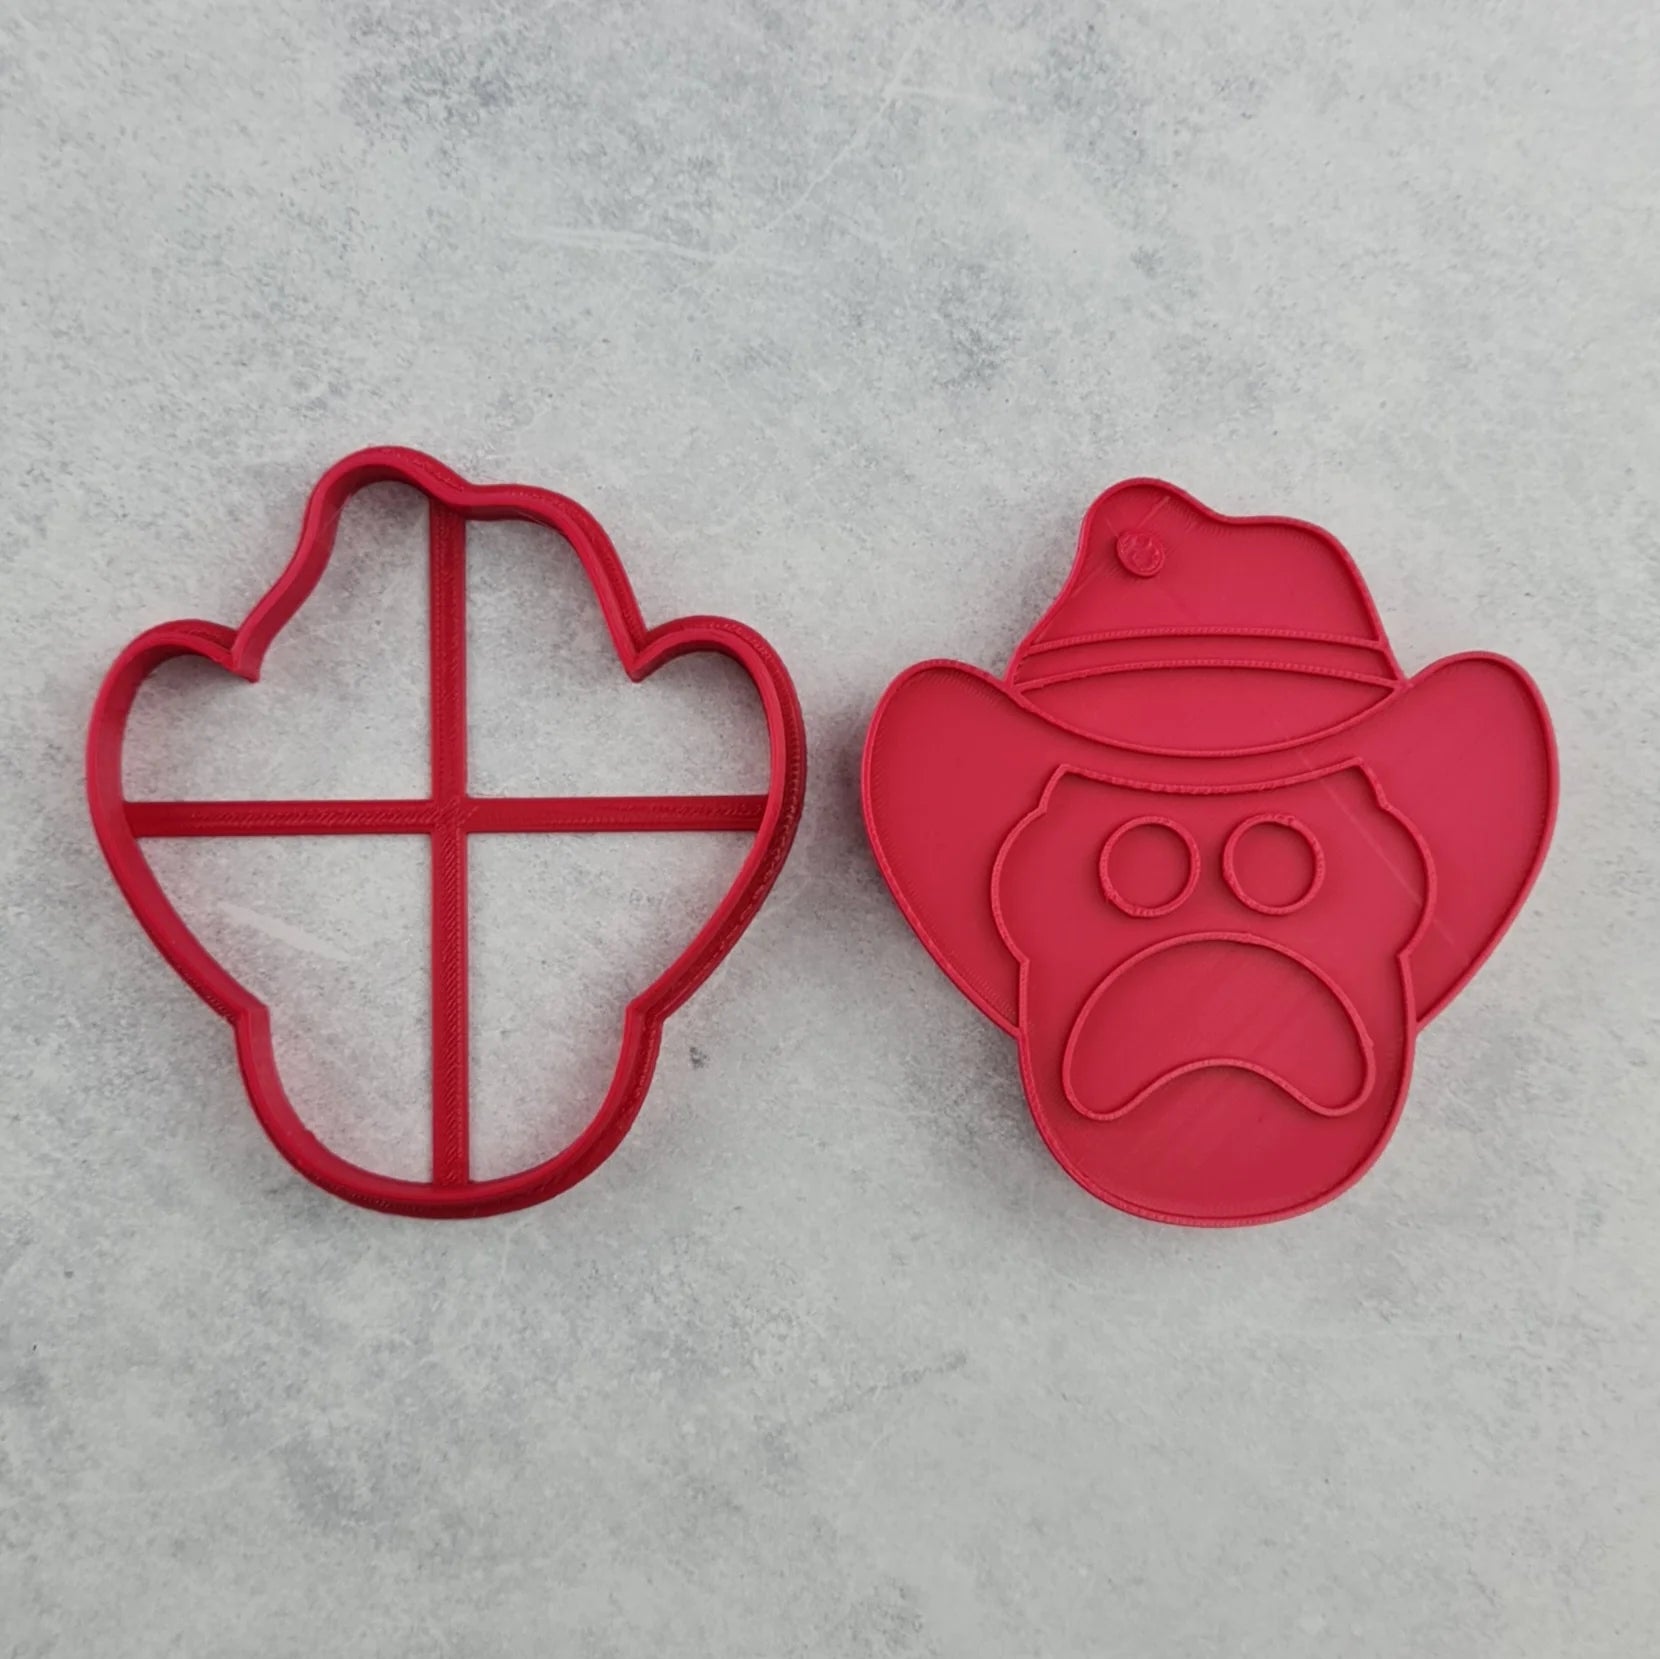 Cowboy Cutter and Dough Imprint Set by The Confectionist